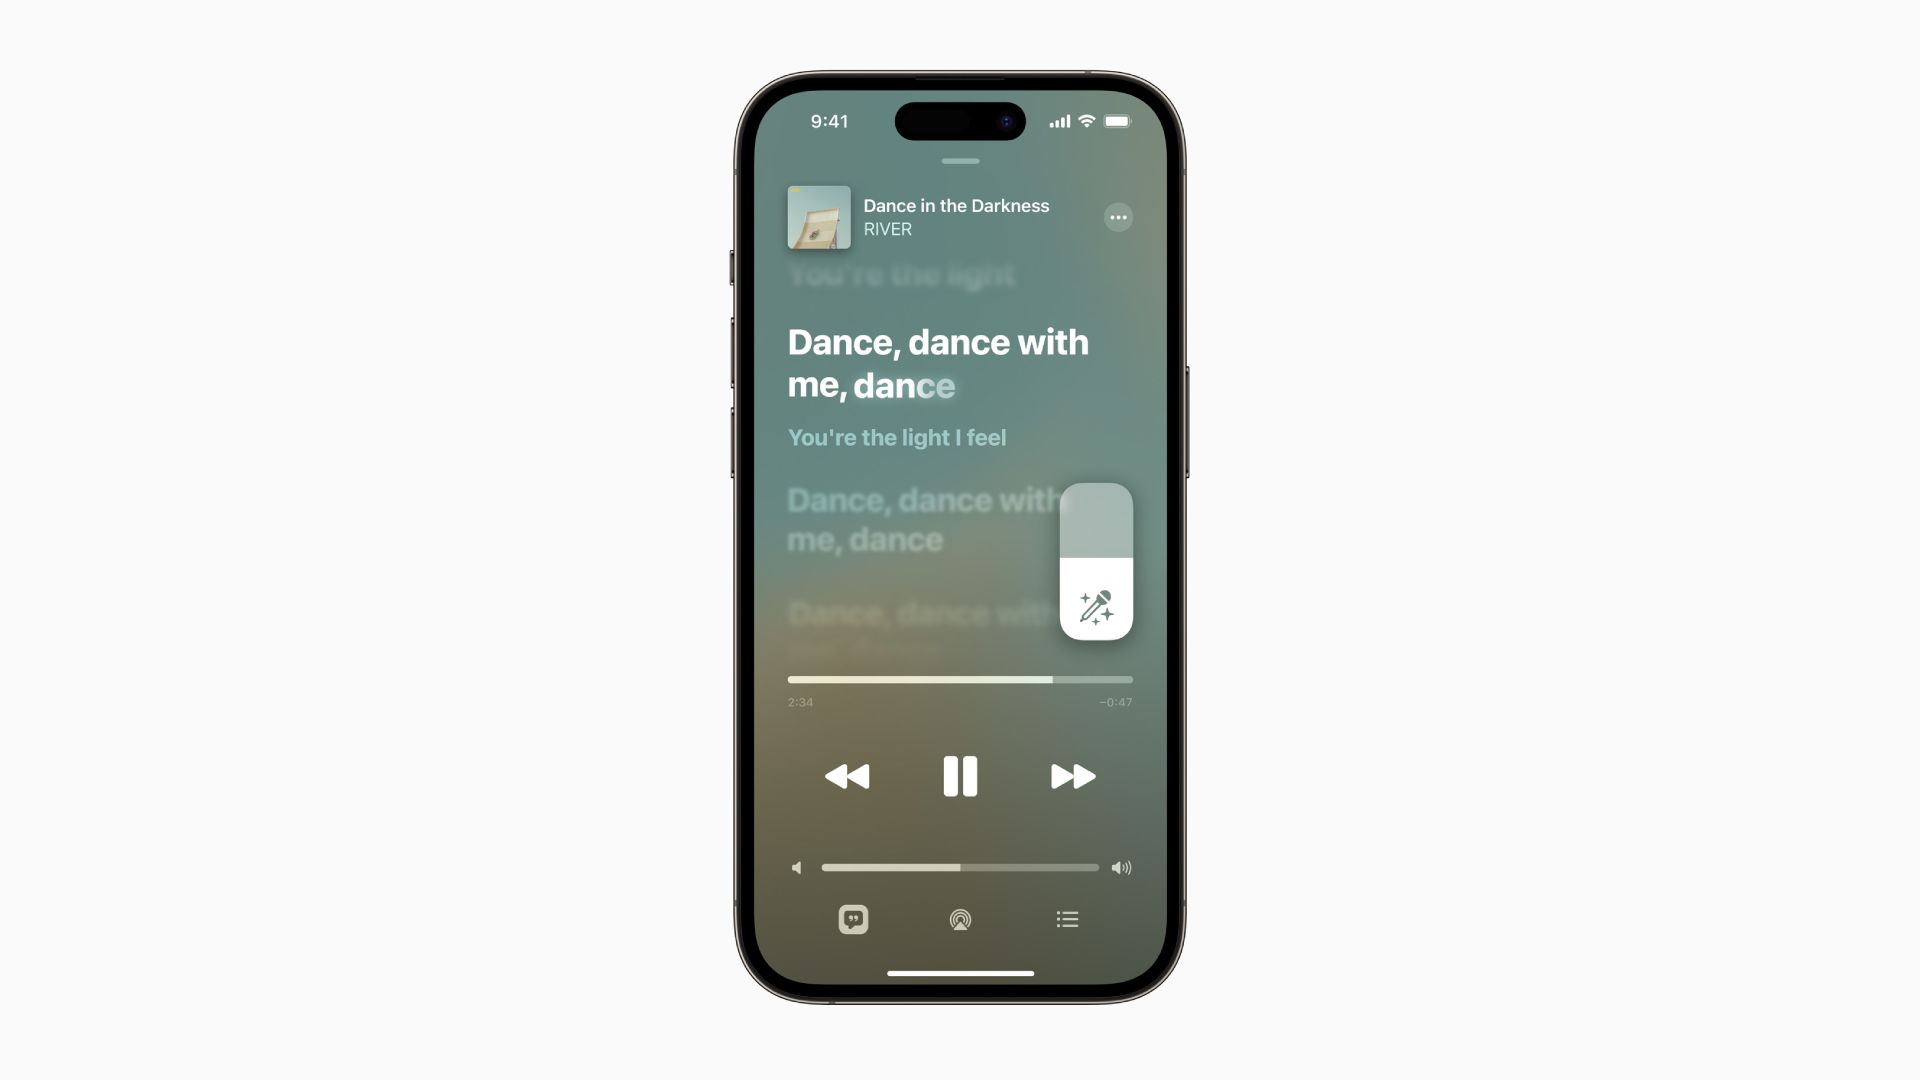 How Apple Music Sing will appear on the iPhone, users will be able to sing along to the lyrics and change the volume of the vocals as they sing.